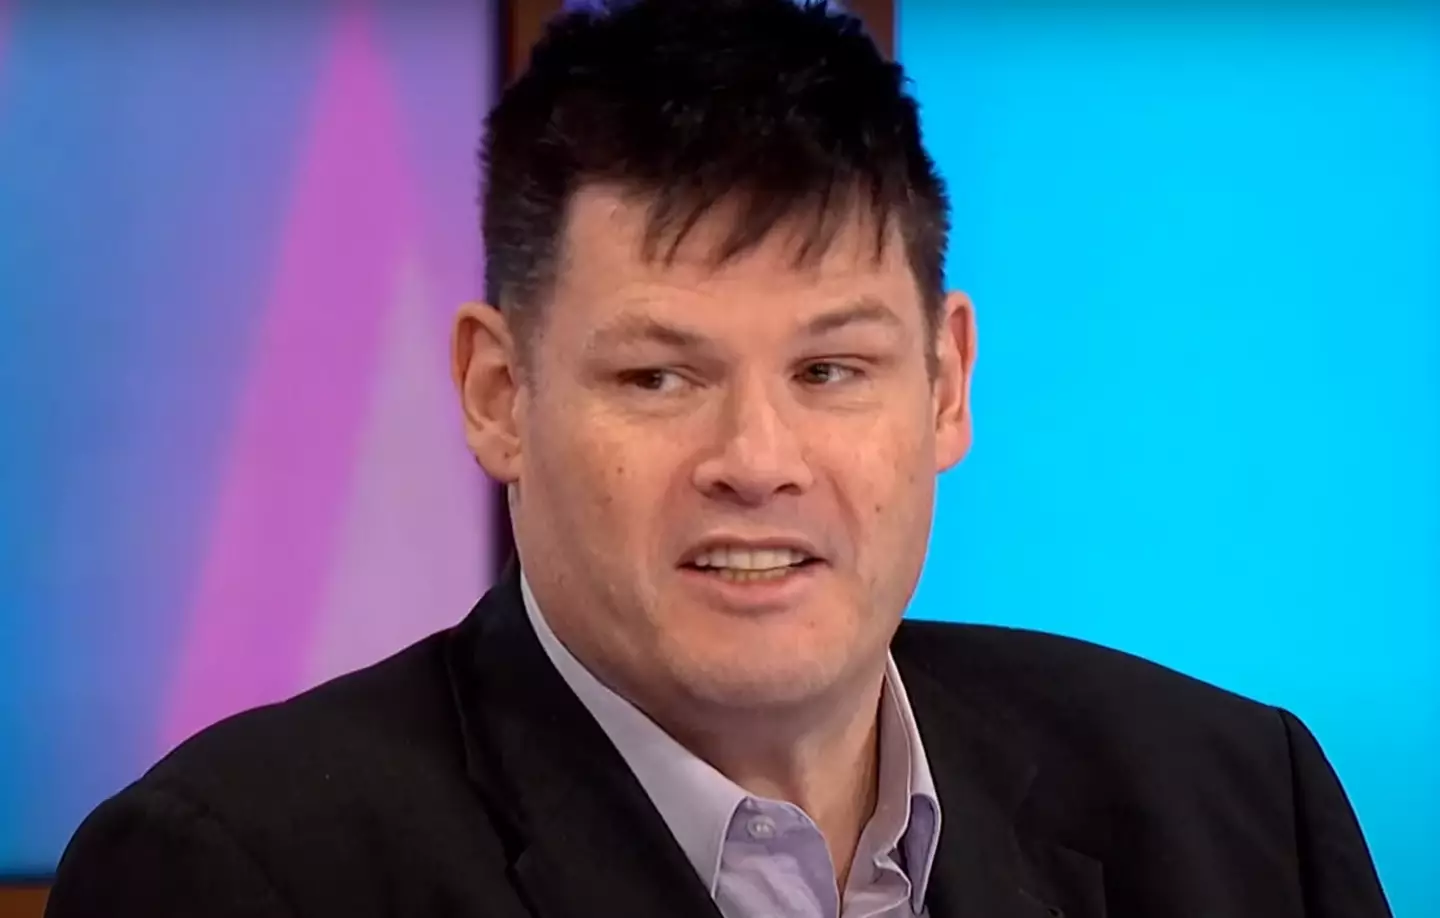 Mark Labbett has been open about his weight loss journey.